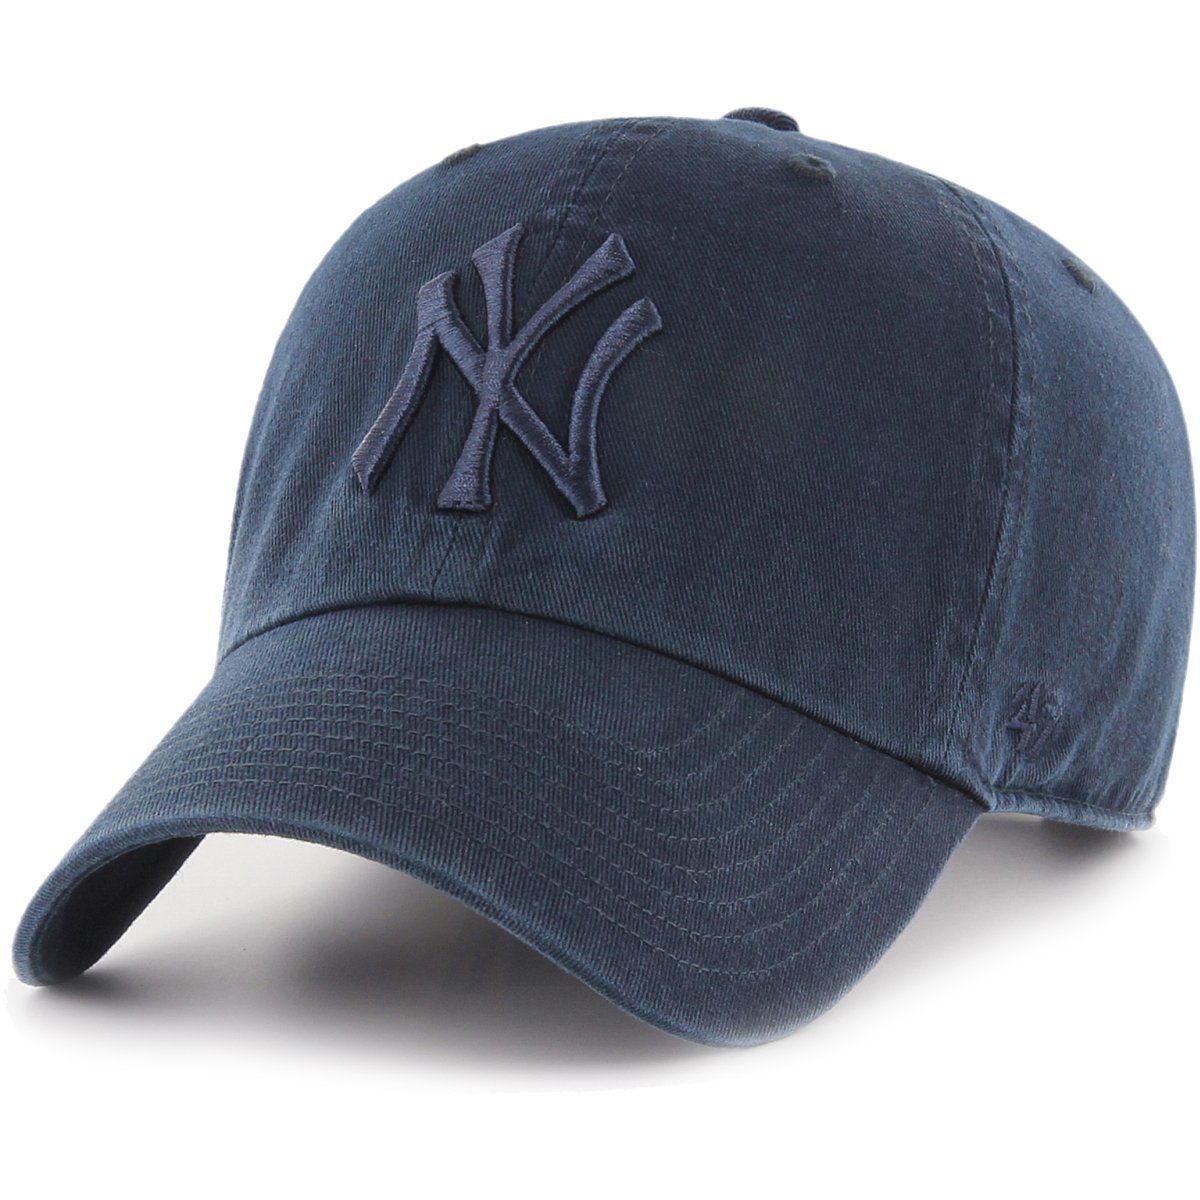 New Yankees CLEAN Fit '47 Brand York UP Relaxed Cap Baseball